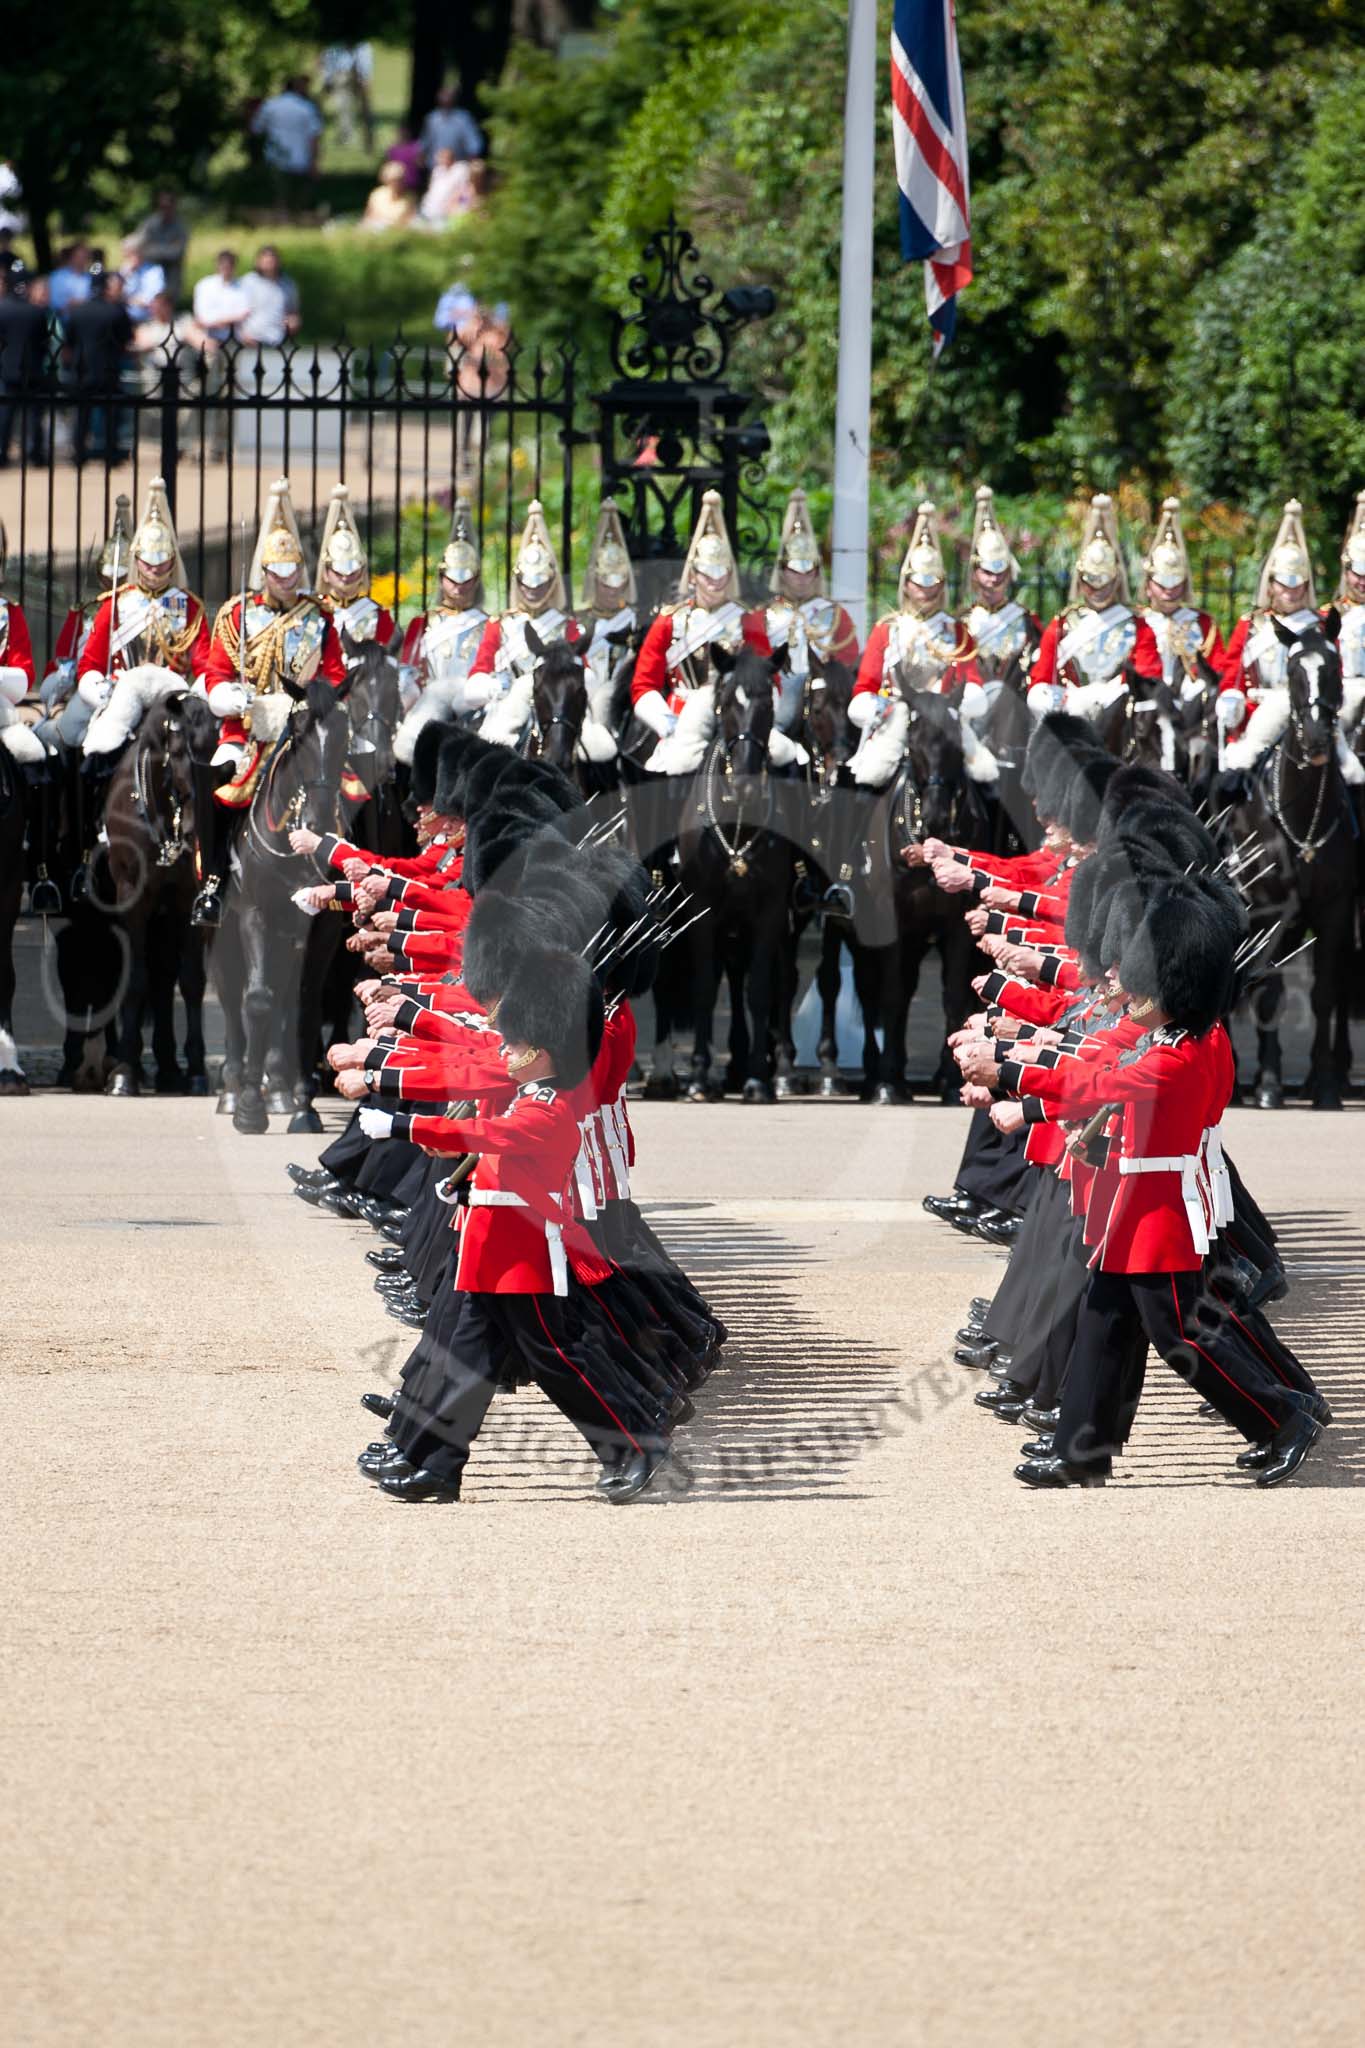 Trooping the Colour 2009: The March Past - No. 6 Guard, F Company Scots Guards, marching in front of The Life Guards..
Horse Guards Parade, Westminster,
London SW1,

United Kingdom,
on 13 June 2009 at 11:44, image #217